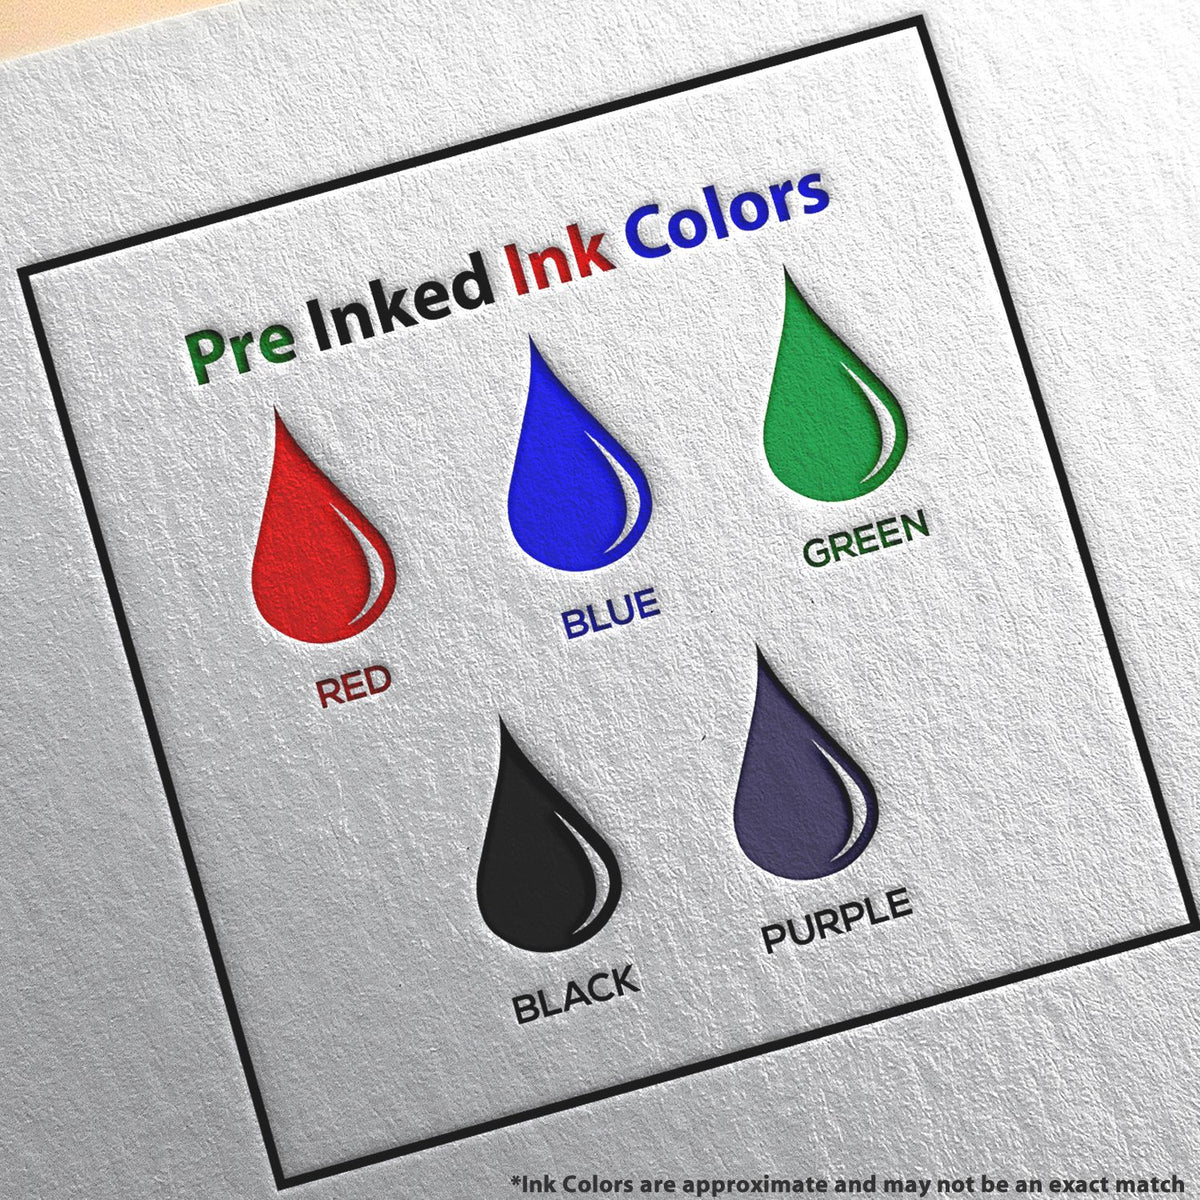 A picture showing the different ink colors or hues available for the Premium MaxLight Pre-Inked Alabama Engineering Stamp product.